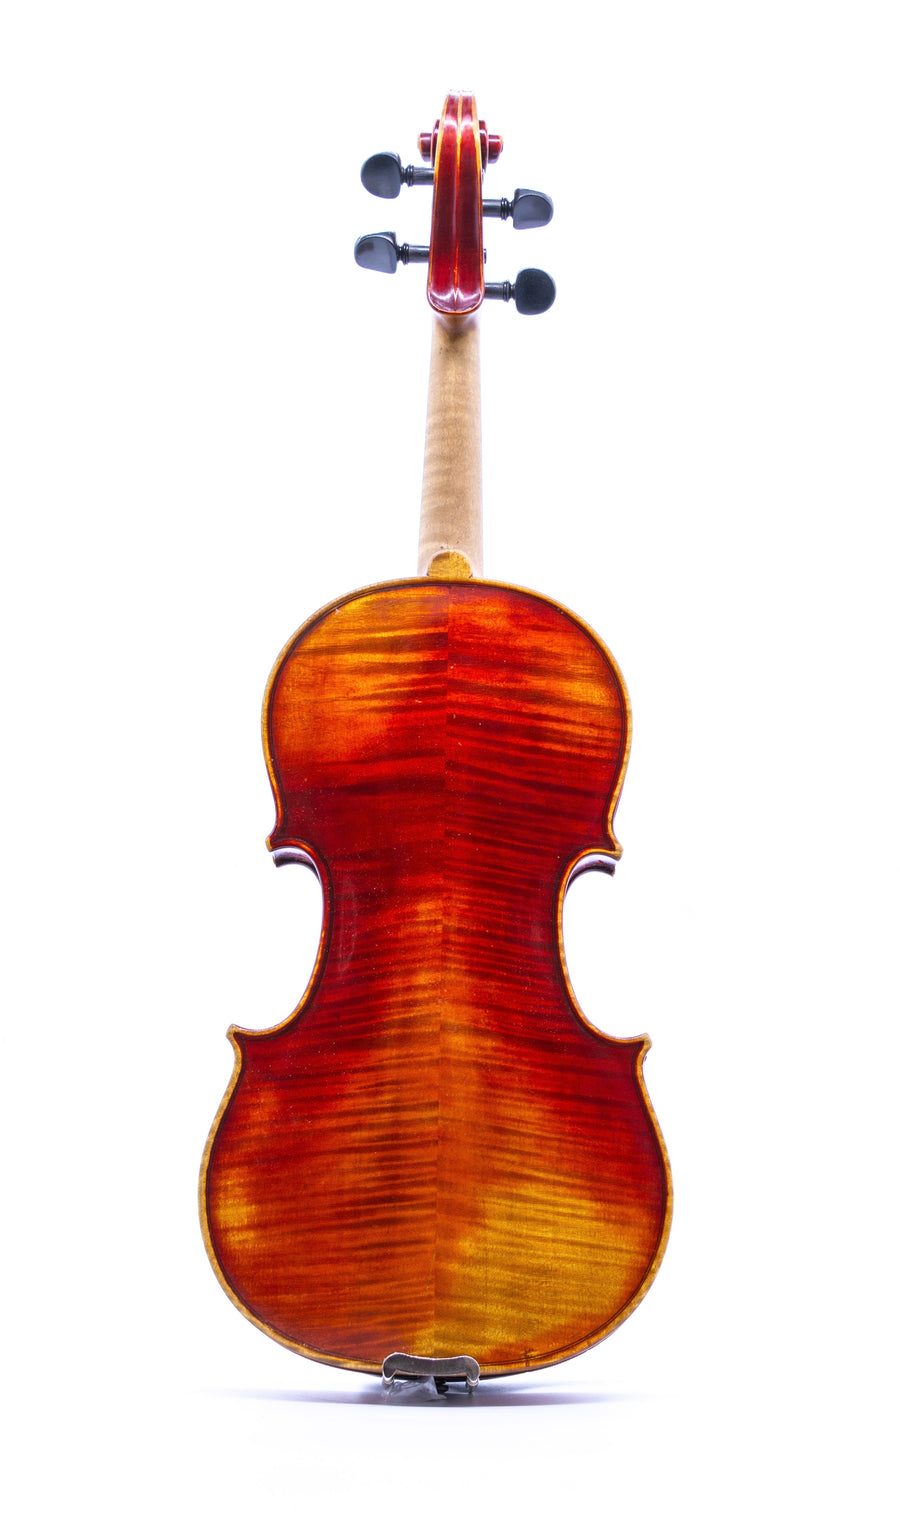 A Fine English Violin by Hungarian Master, Bela Szepessy, 1898.